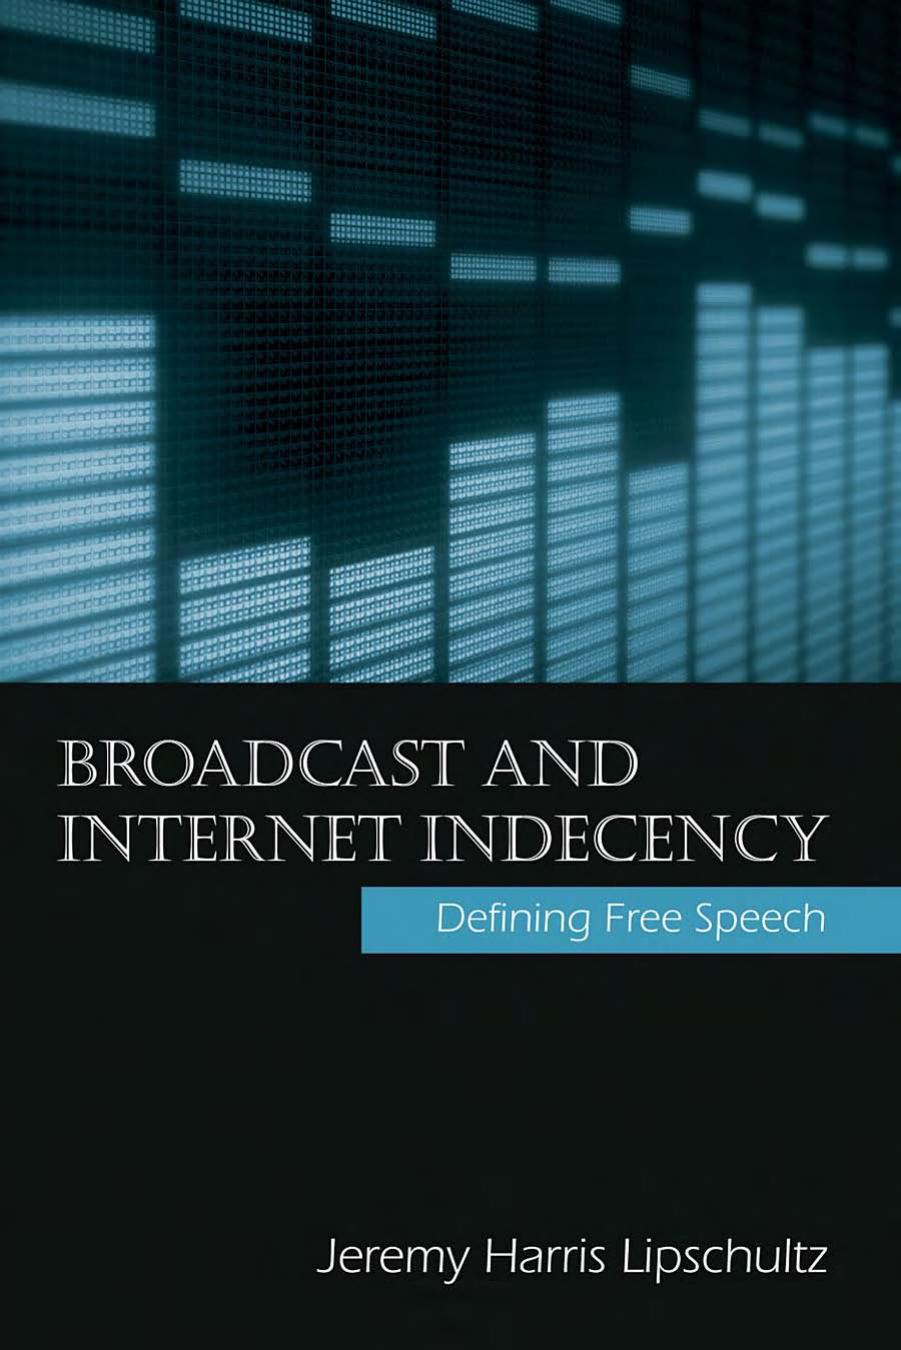 Broadcast and Internet Indecency: Defining Free Speech